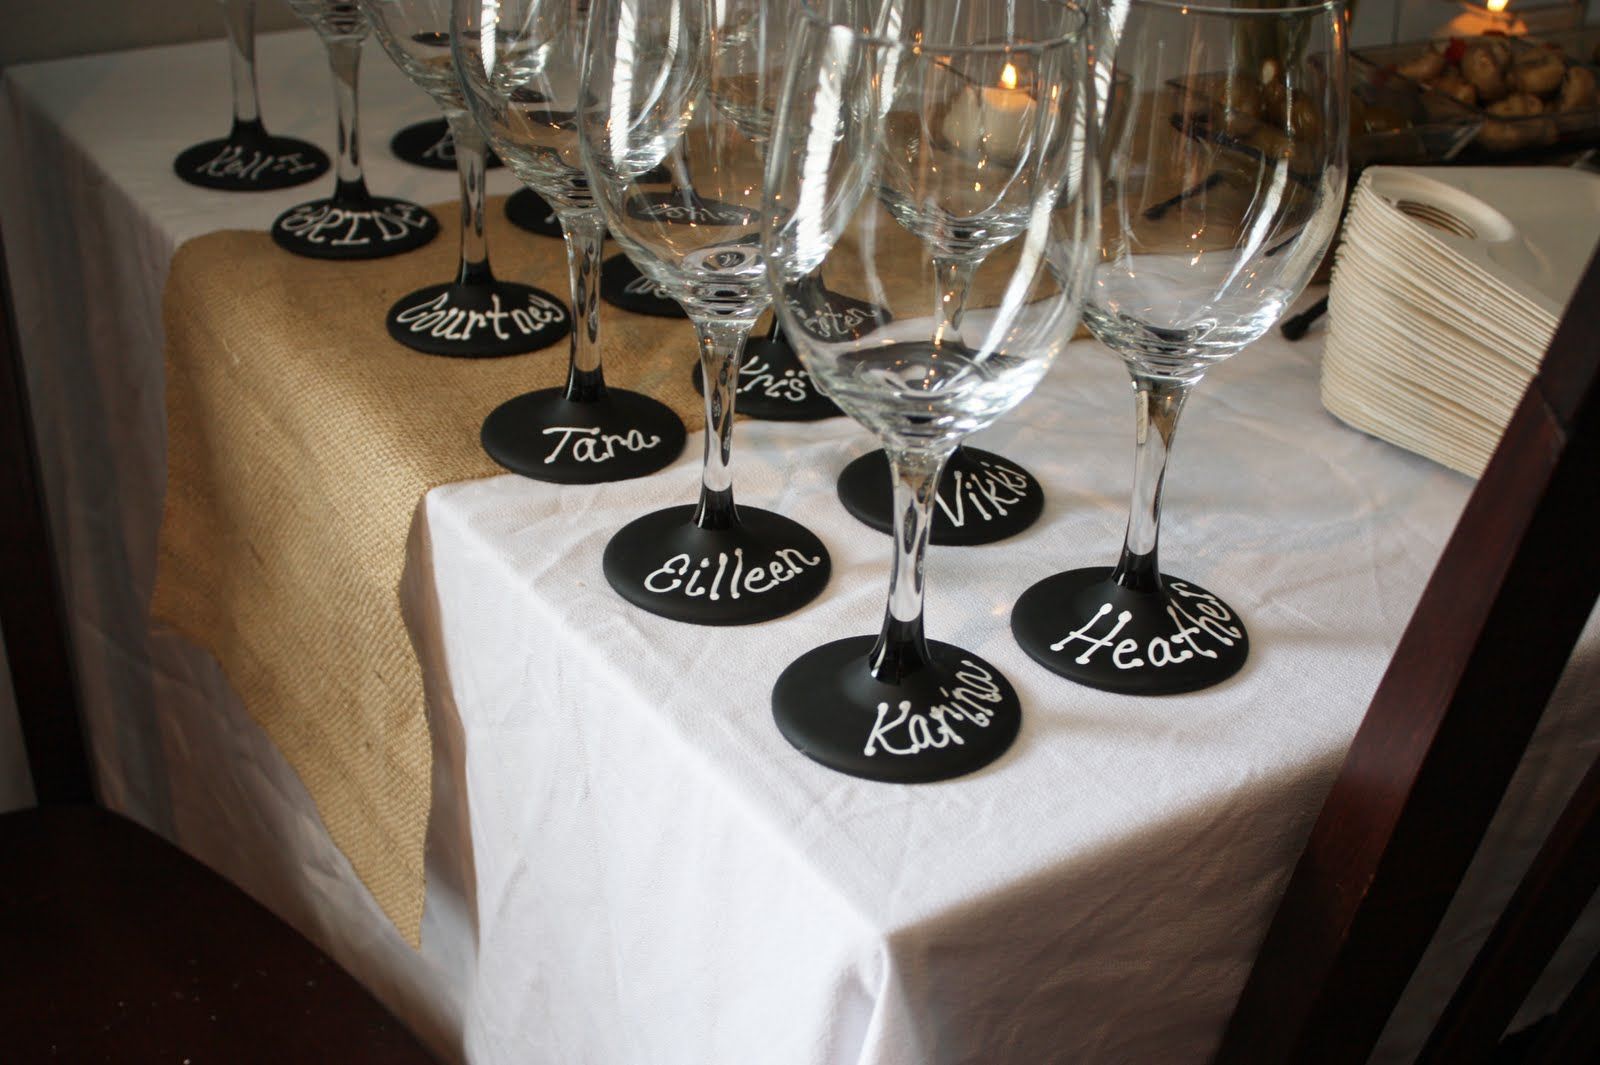 Dollar Tree $1 wine glasses painted with chalkboard paint. Perfect for this wine tasting bridal